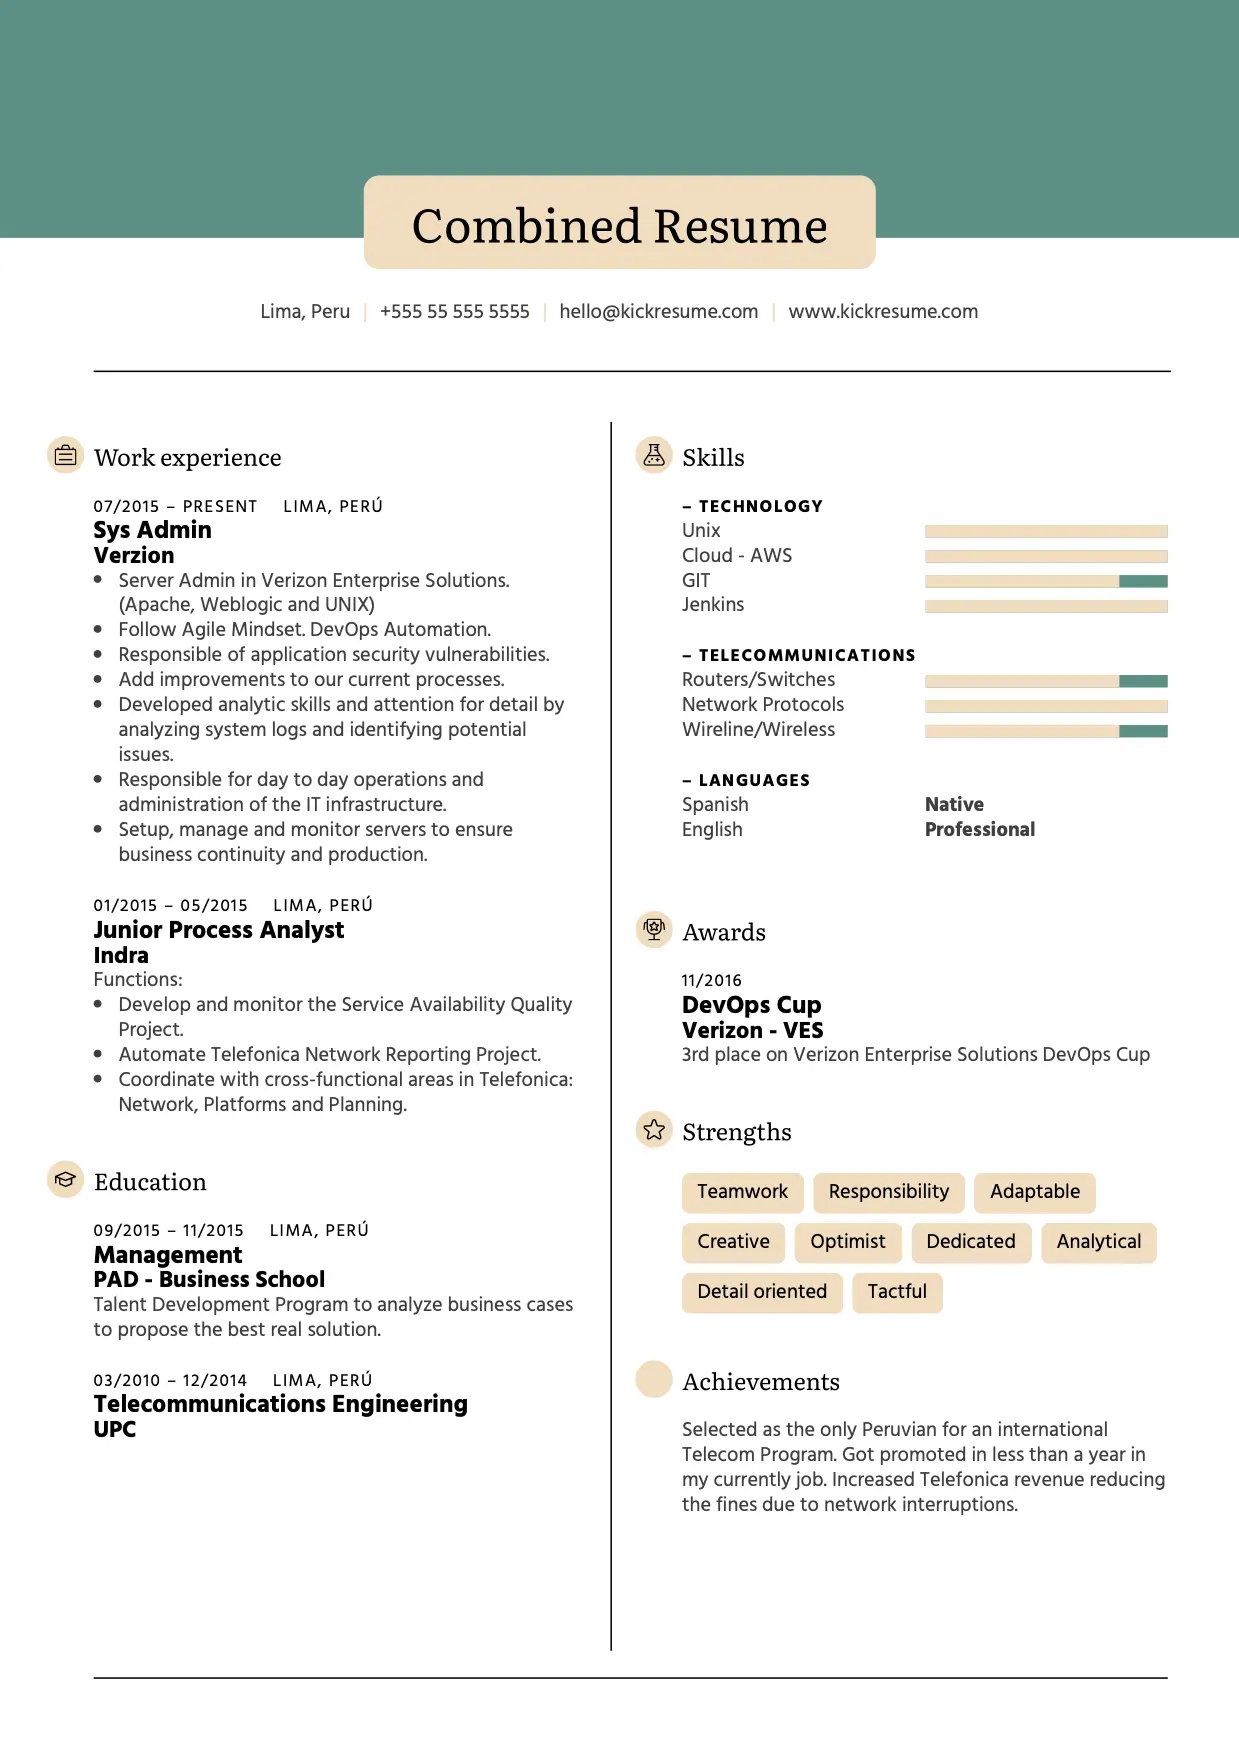 combined resume format